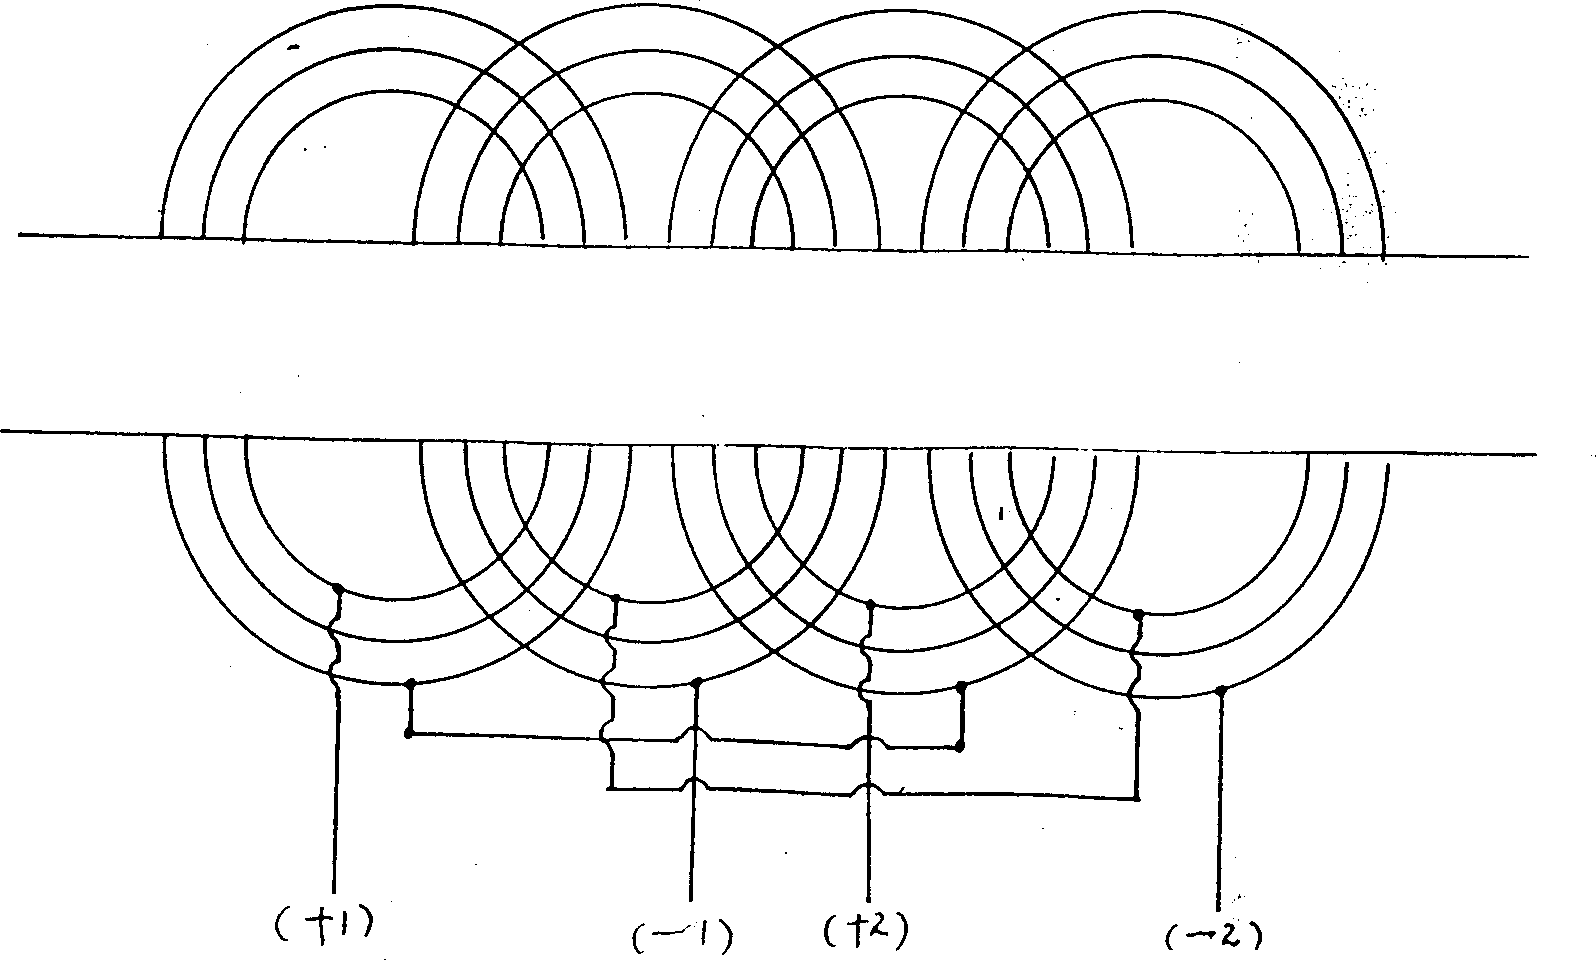 Single-phase AC permanent-magnet synchronous motor